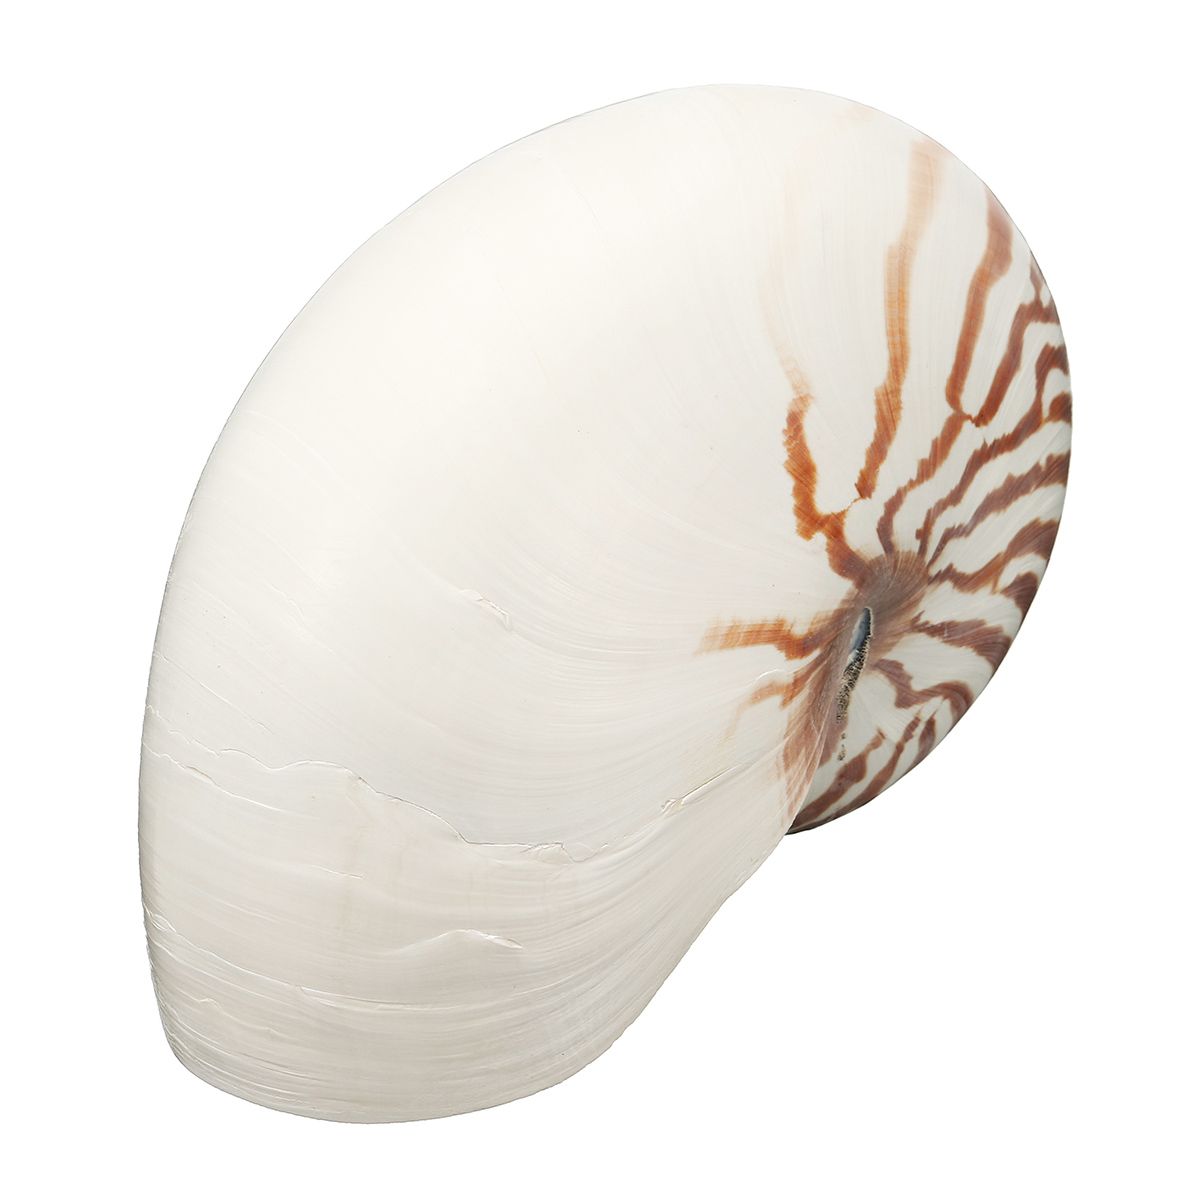 17-19cm-Natural-Conch-SeaShell-Tiger-Chambered-Pompilius-Fish-Tank-Home-Decorations-1476998